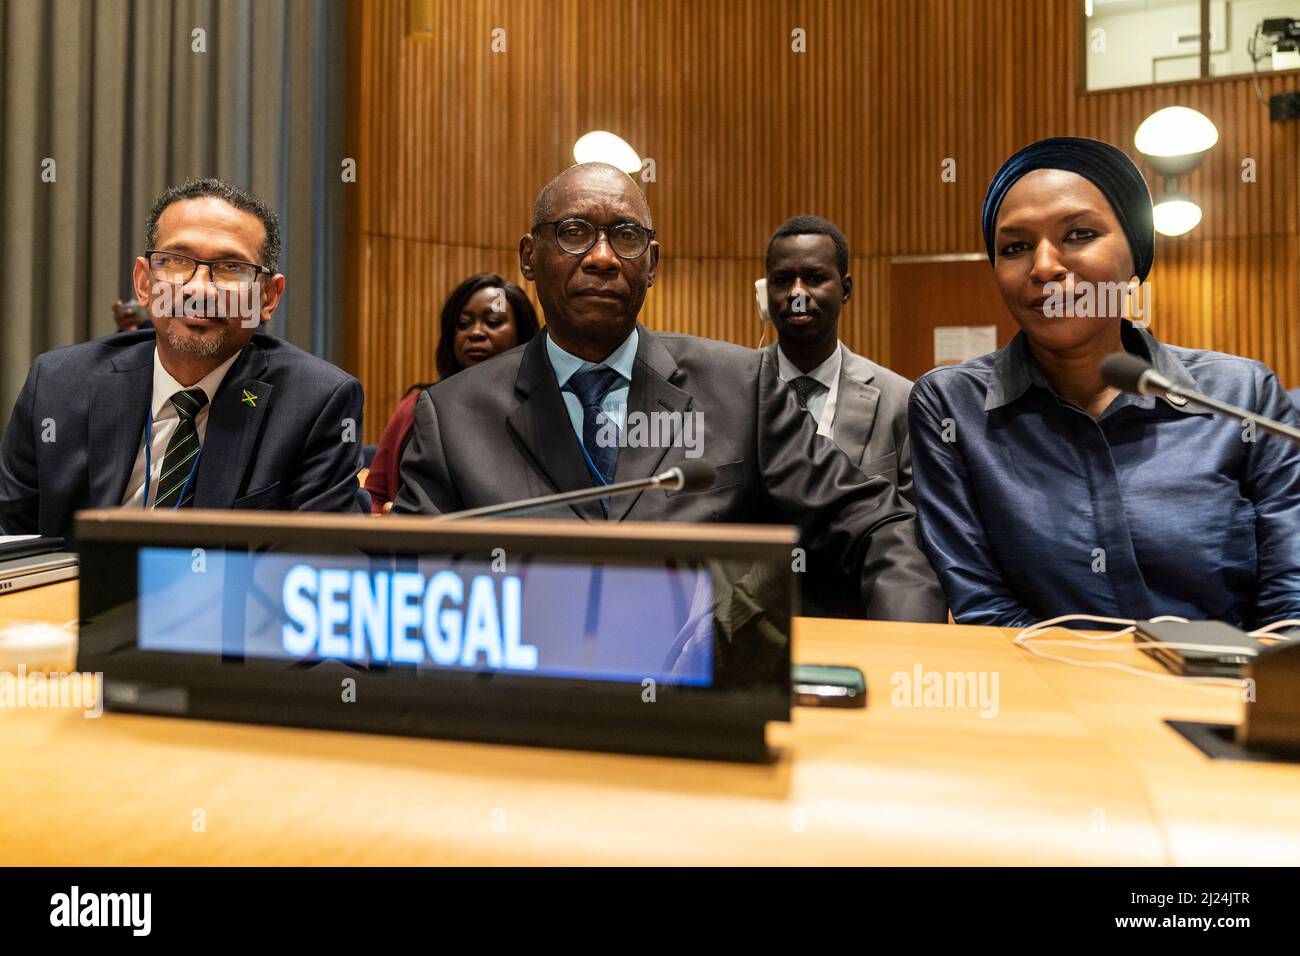 New York, USA. 29th Mar, 2022. Brian Wallace, Permanent Representative of Jamaica, Cheikh Niang, Permanent Representative of Senegal, Fatima Mohammed, Permanent Observer of the African Union attends Equiano.Stories - President of the General Assembly's Special Event to mark the International Day of Remembrance of the Victims of Slavery and the Transatlantic Slave Trade at Trusteeship Council Chamber of United Nations Headquarters in New York on March 29, 2022. (Photo by Lev Radin/Sipa USA) Credit: Sipa USA/Alamy Live News Stock Photo